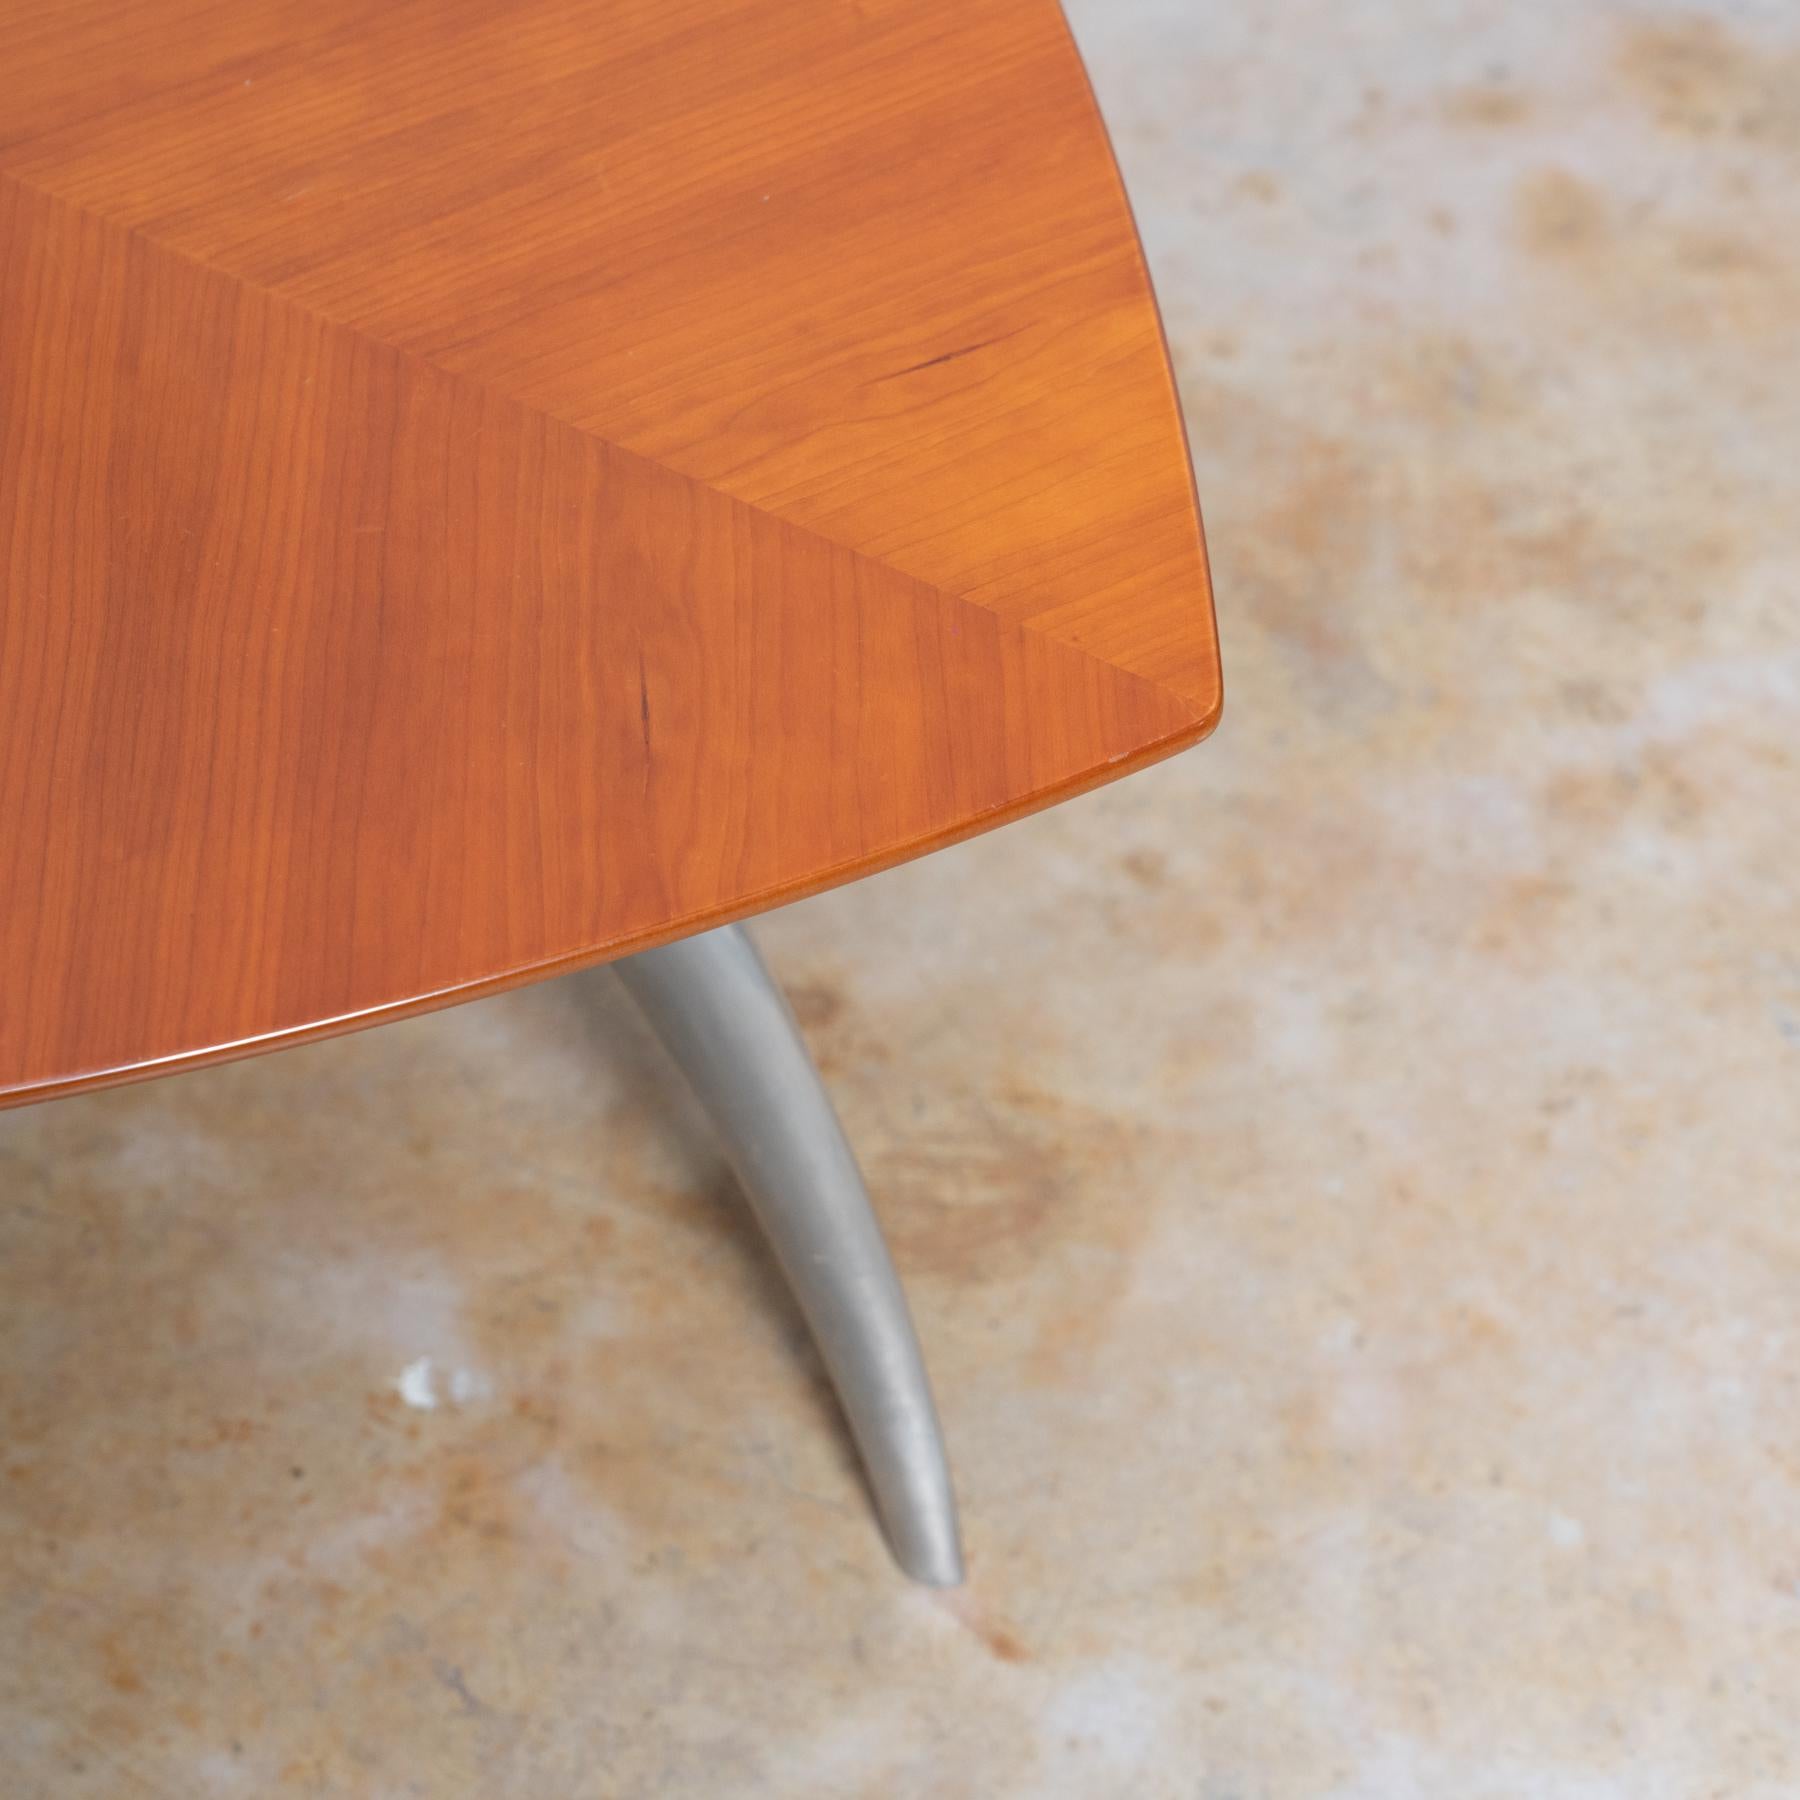 Table designed by Marc Berthier in 1990

Manufactured by Magis

About the designer:
Marc Berthier’s career spans over 55 years in the international design industry. He played a central role in transforming France’s design culture and has guided